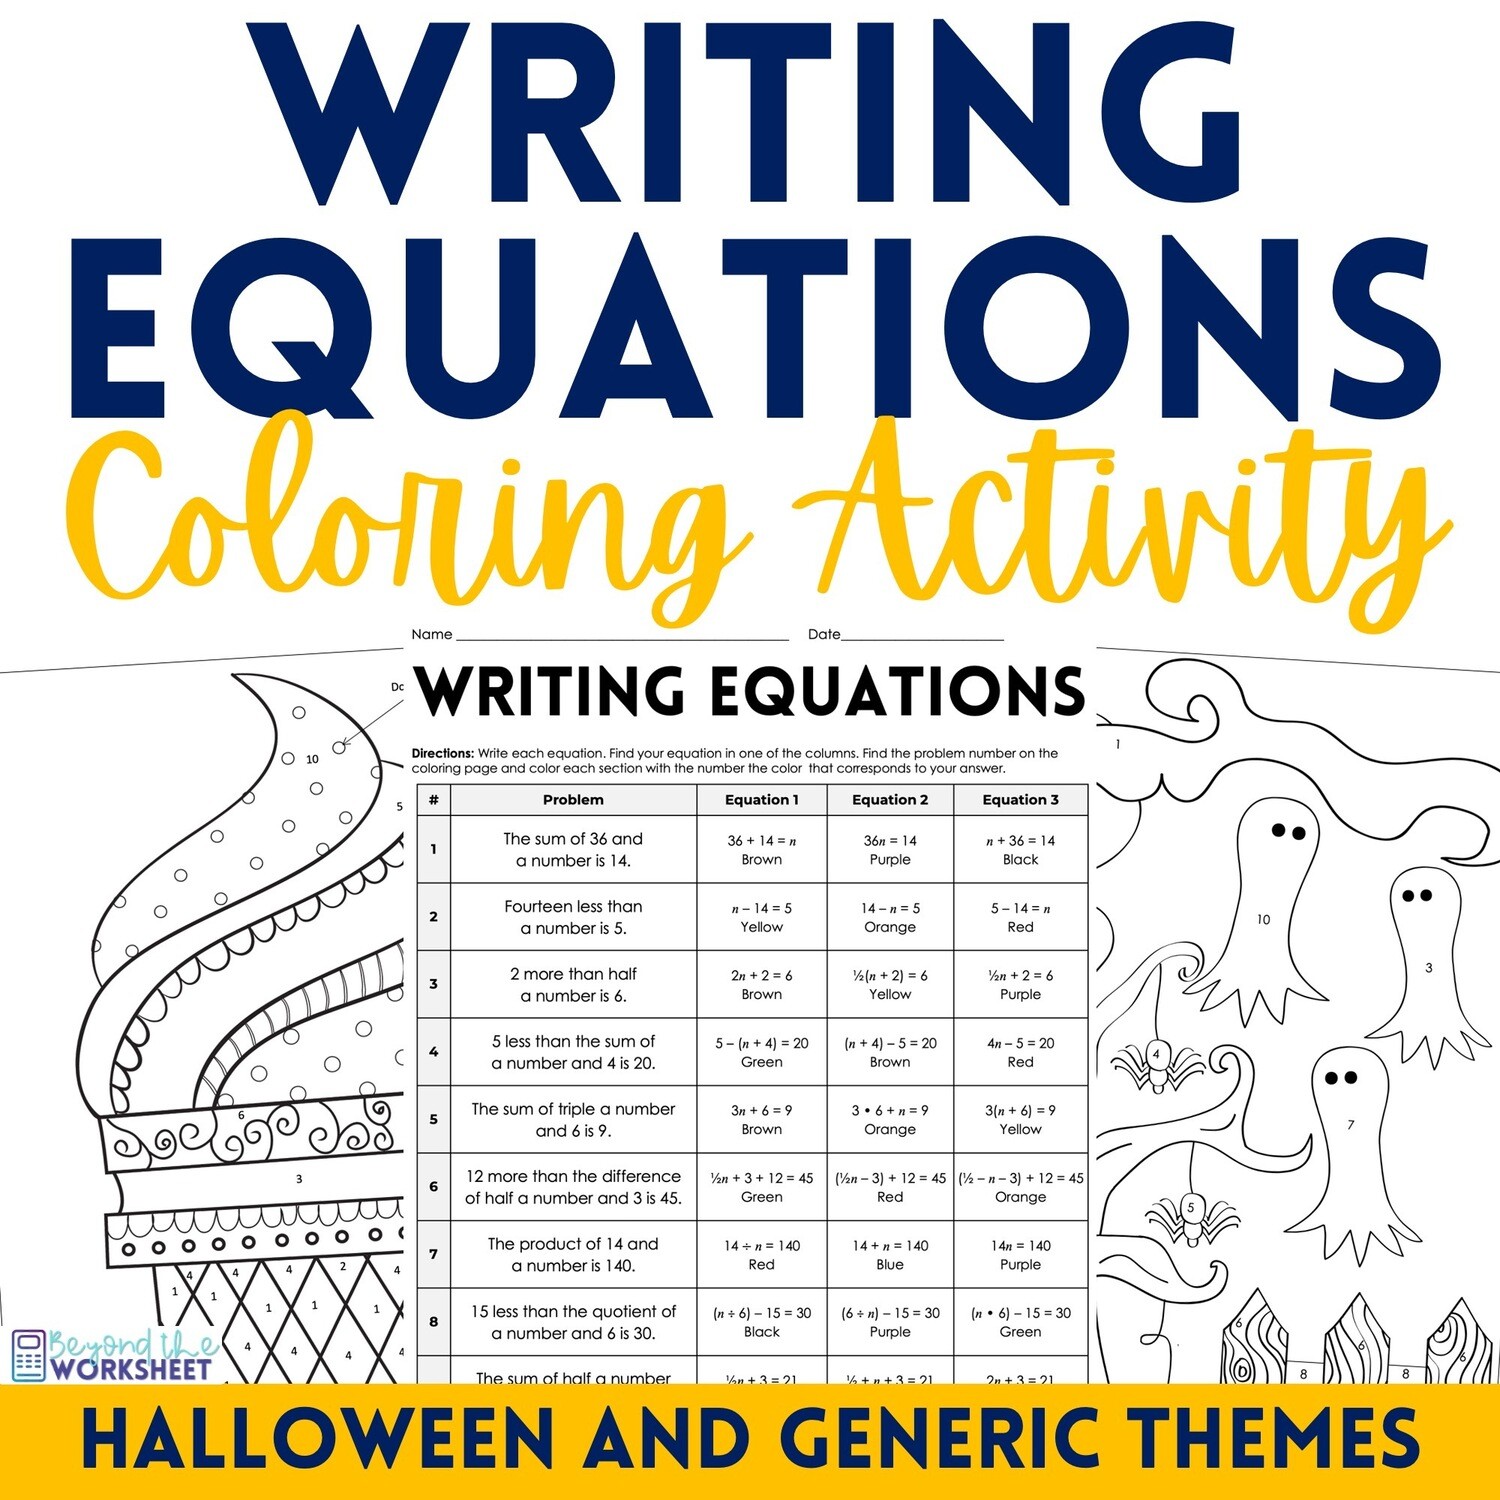 Writing Equations Coloring Activity Worksheet (Halloween and Generic Theme)